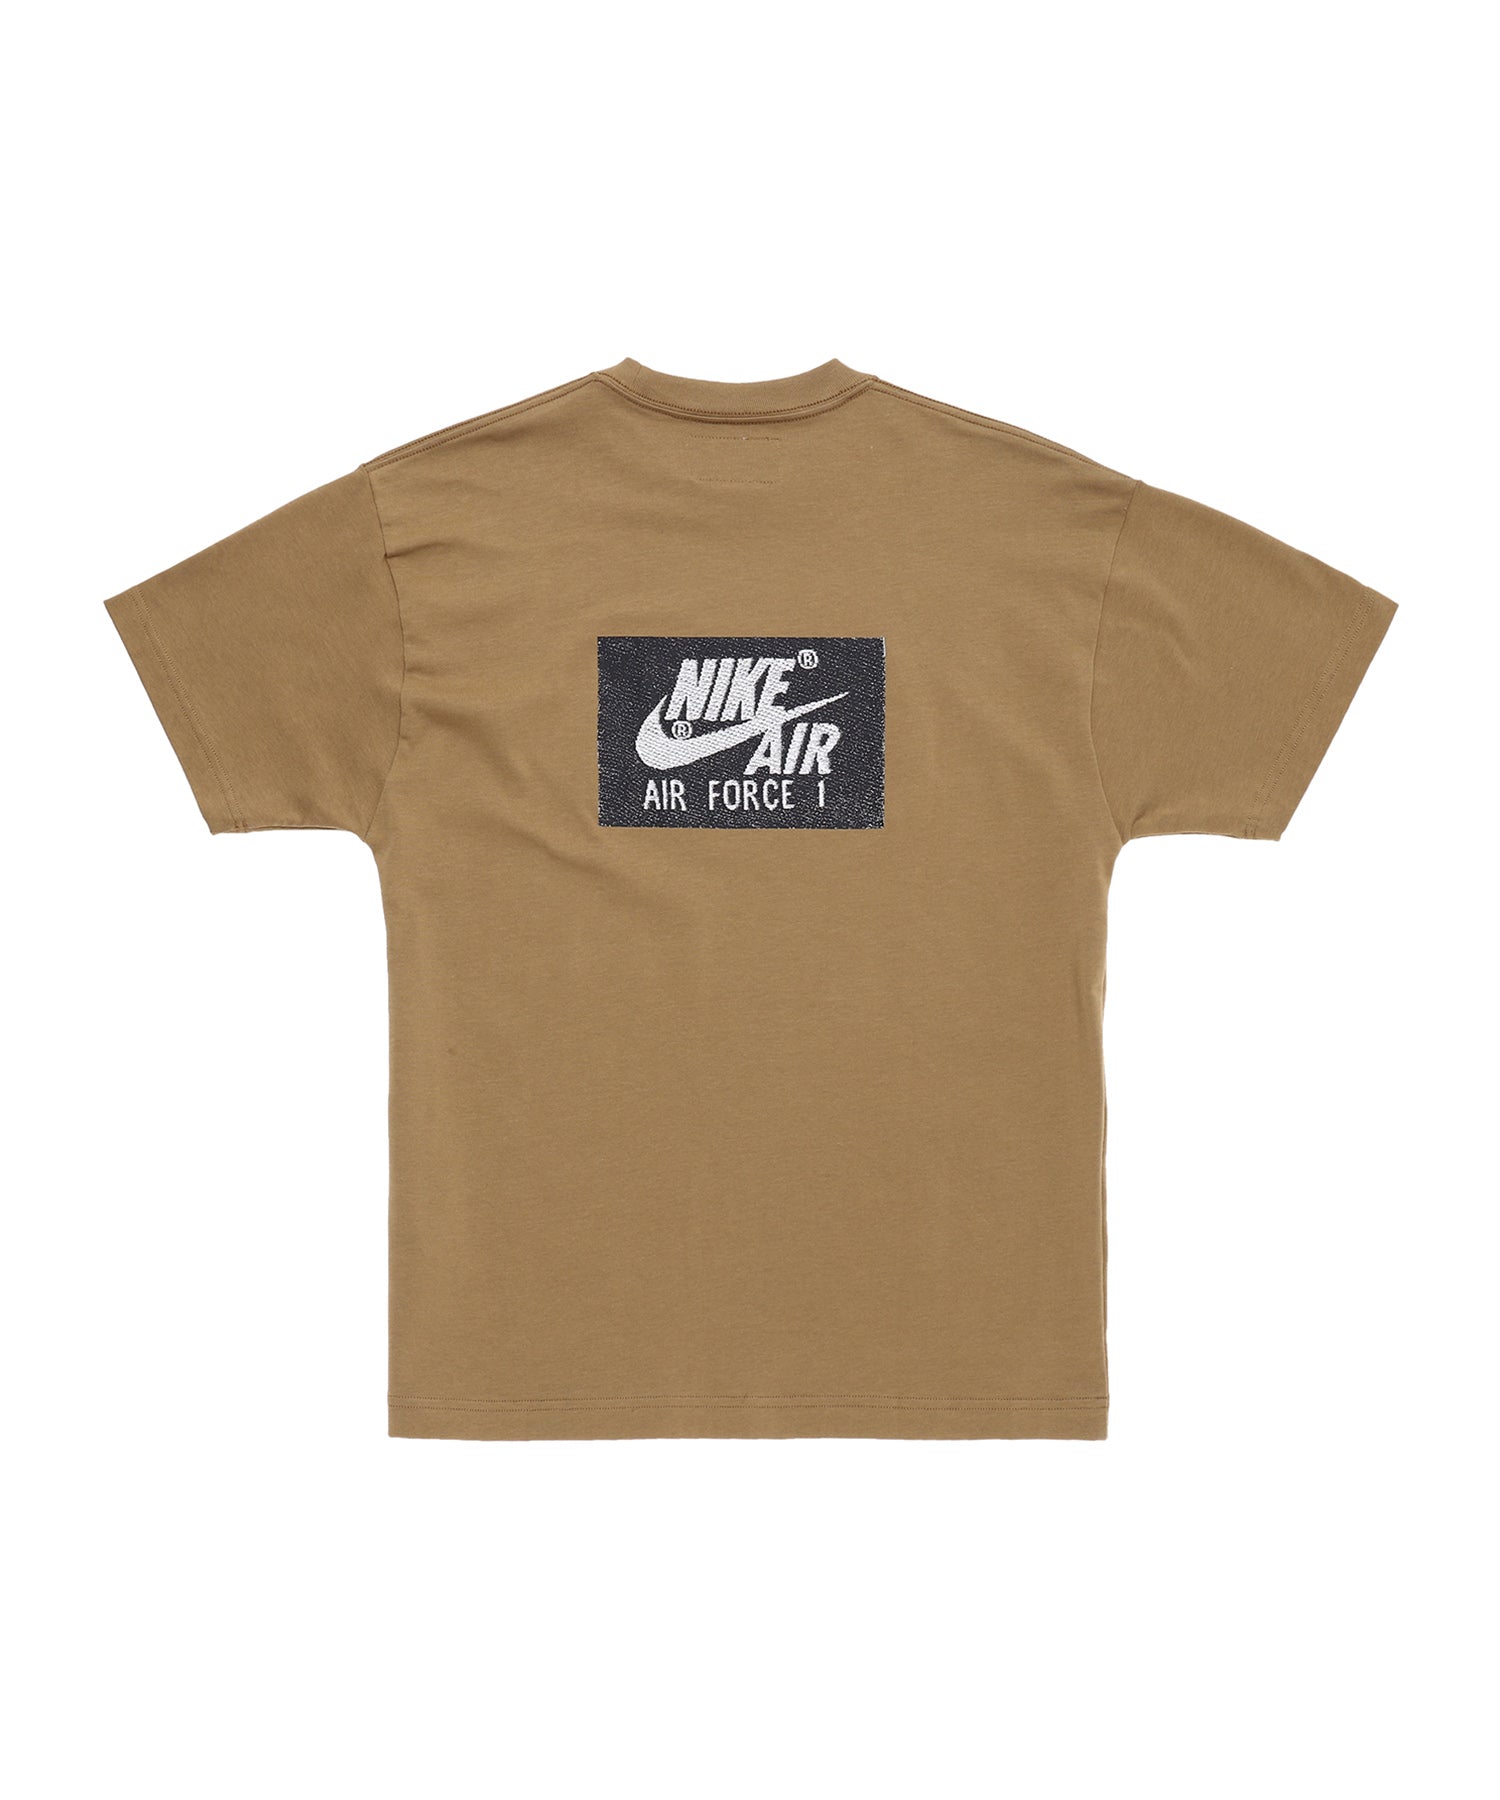 Nike Nrg Insd Out S/S Tee